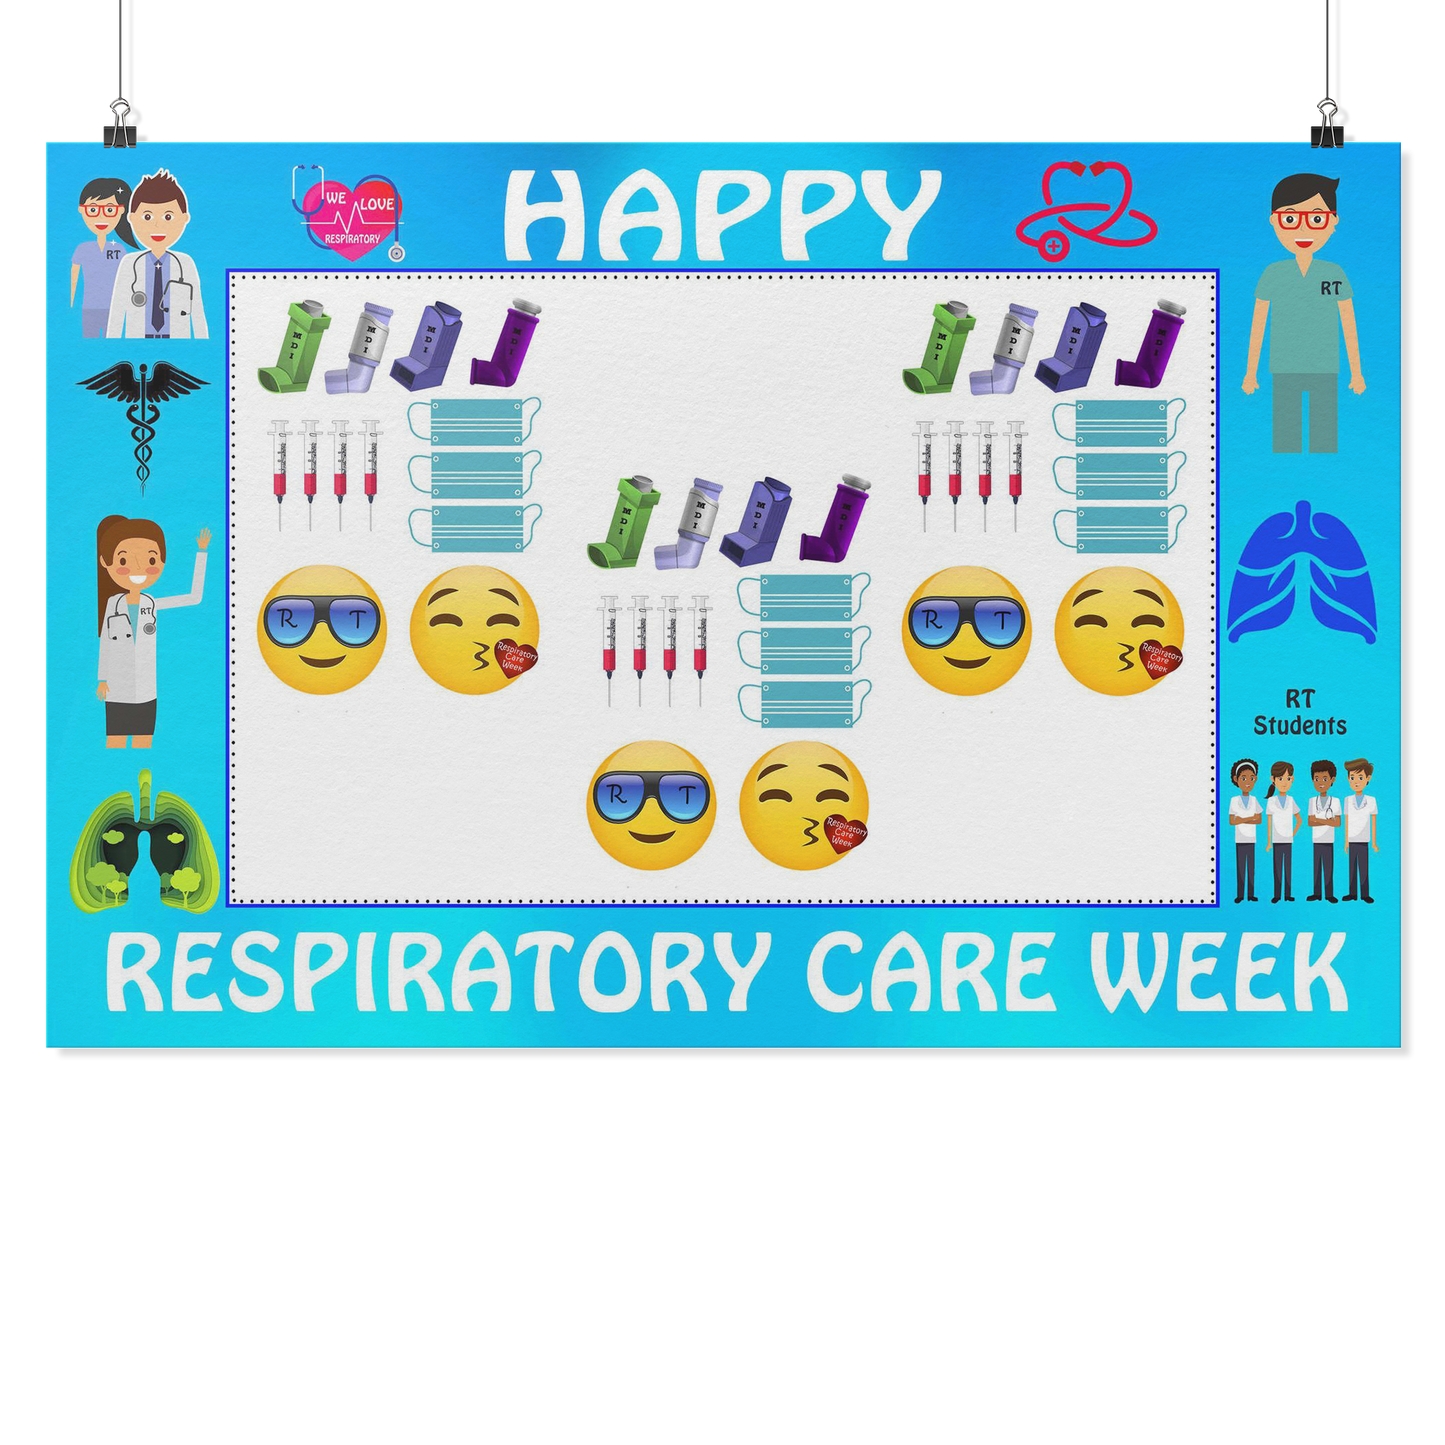 Respiratory Therapist | Respiratory Care Week Photo Frame With Selfie Props - Photo Booth Frame